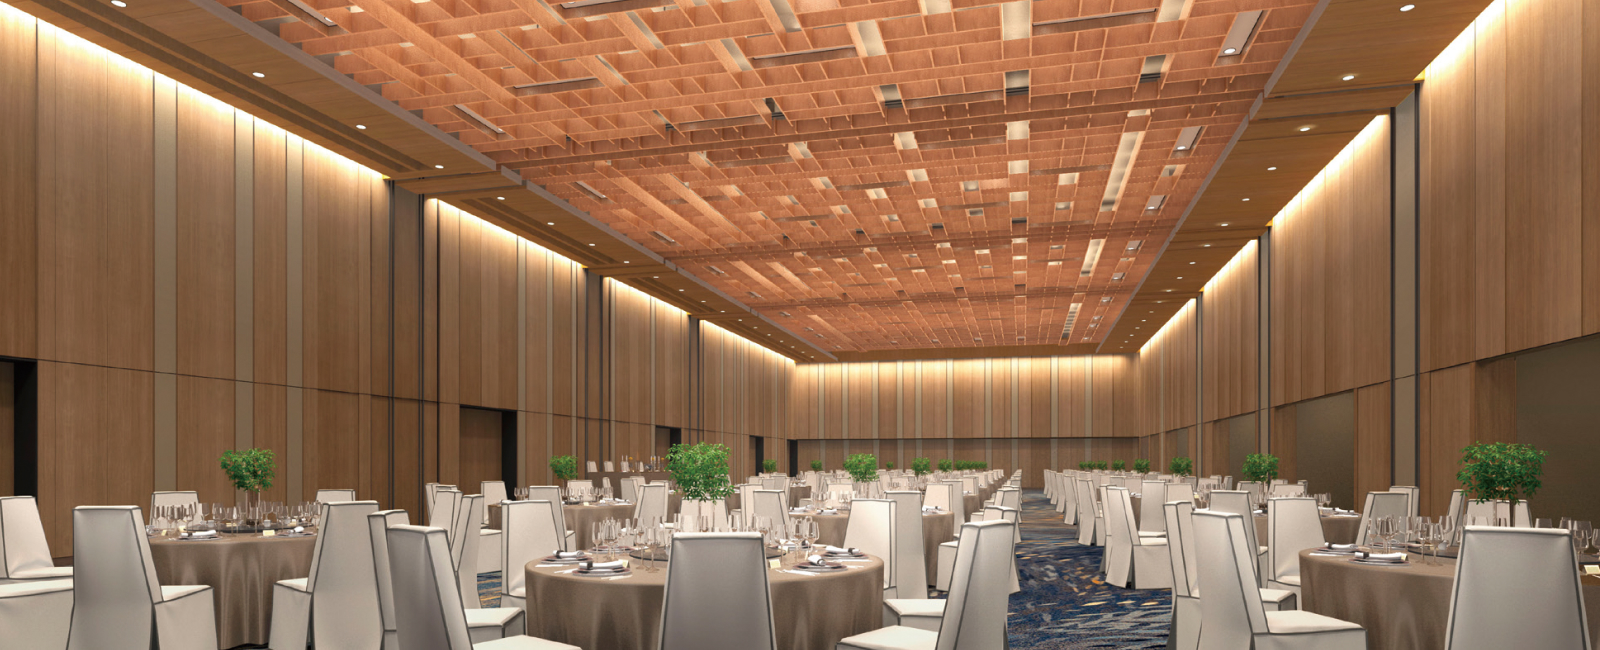 arious banquet rooms for different occasions